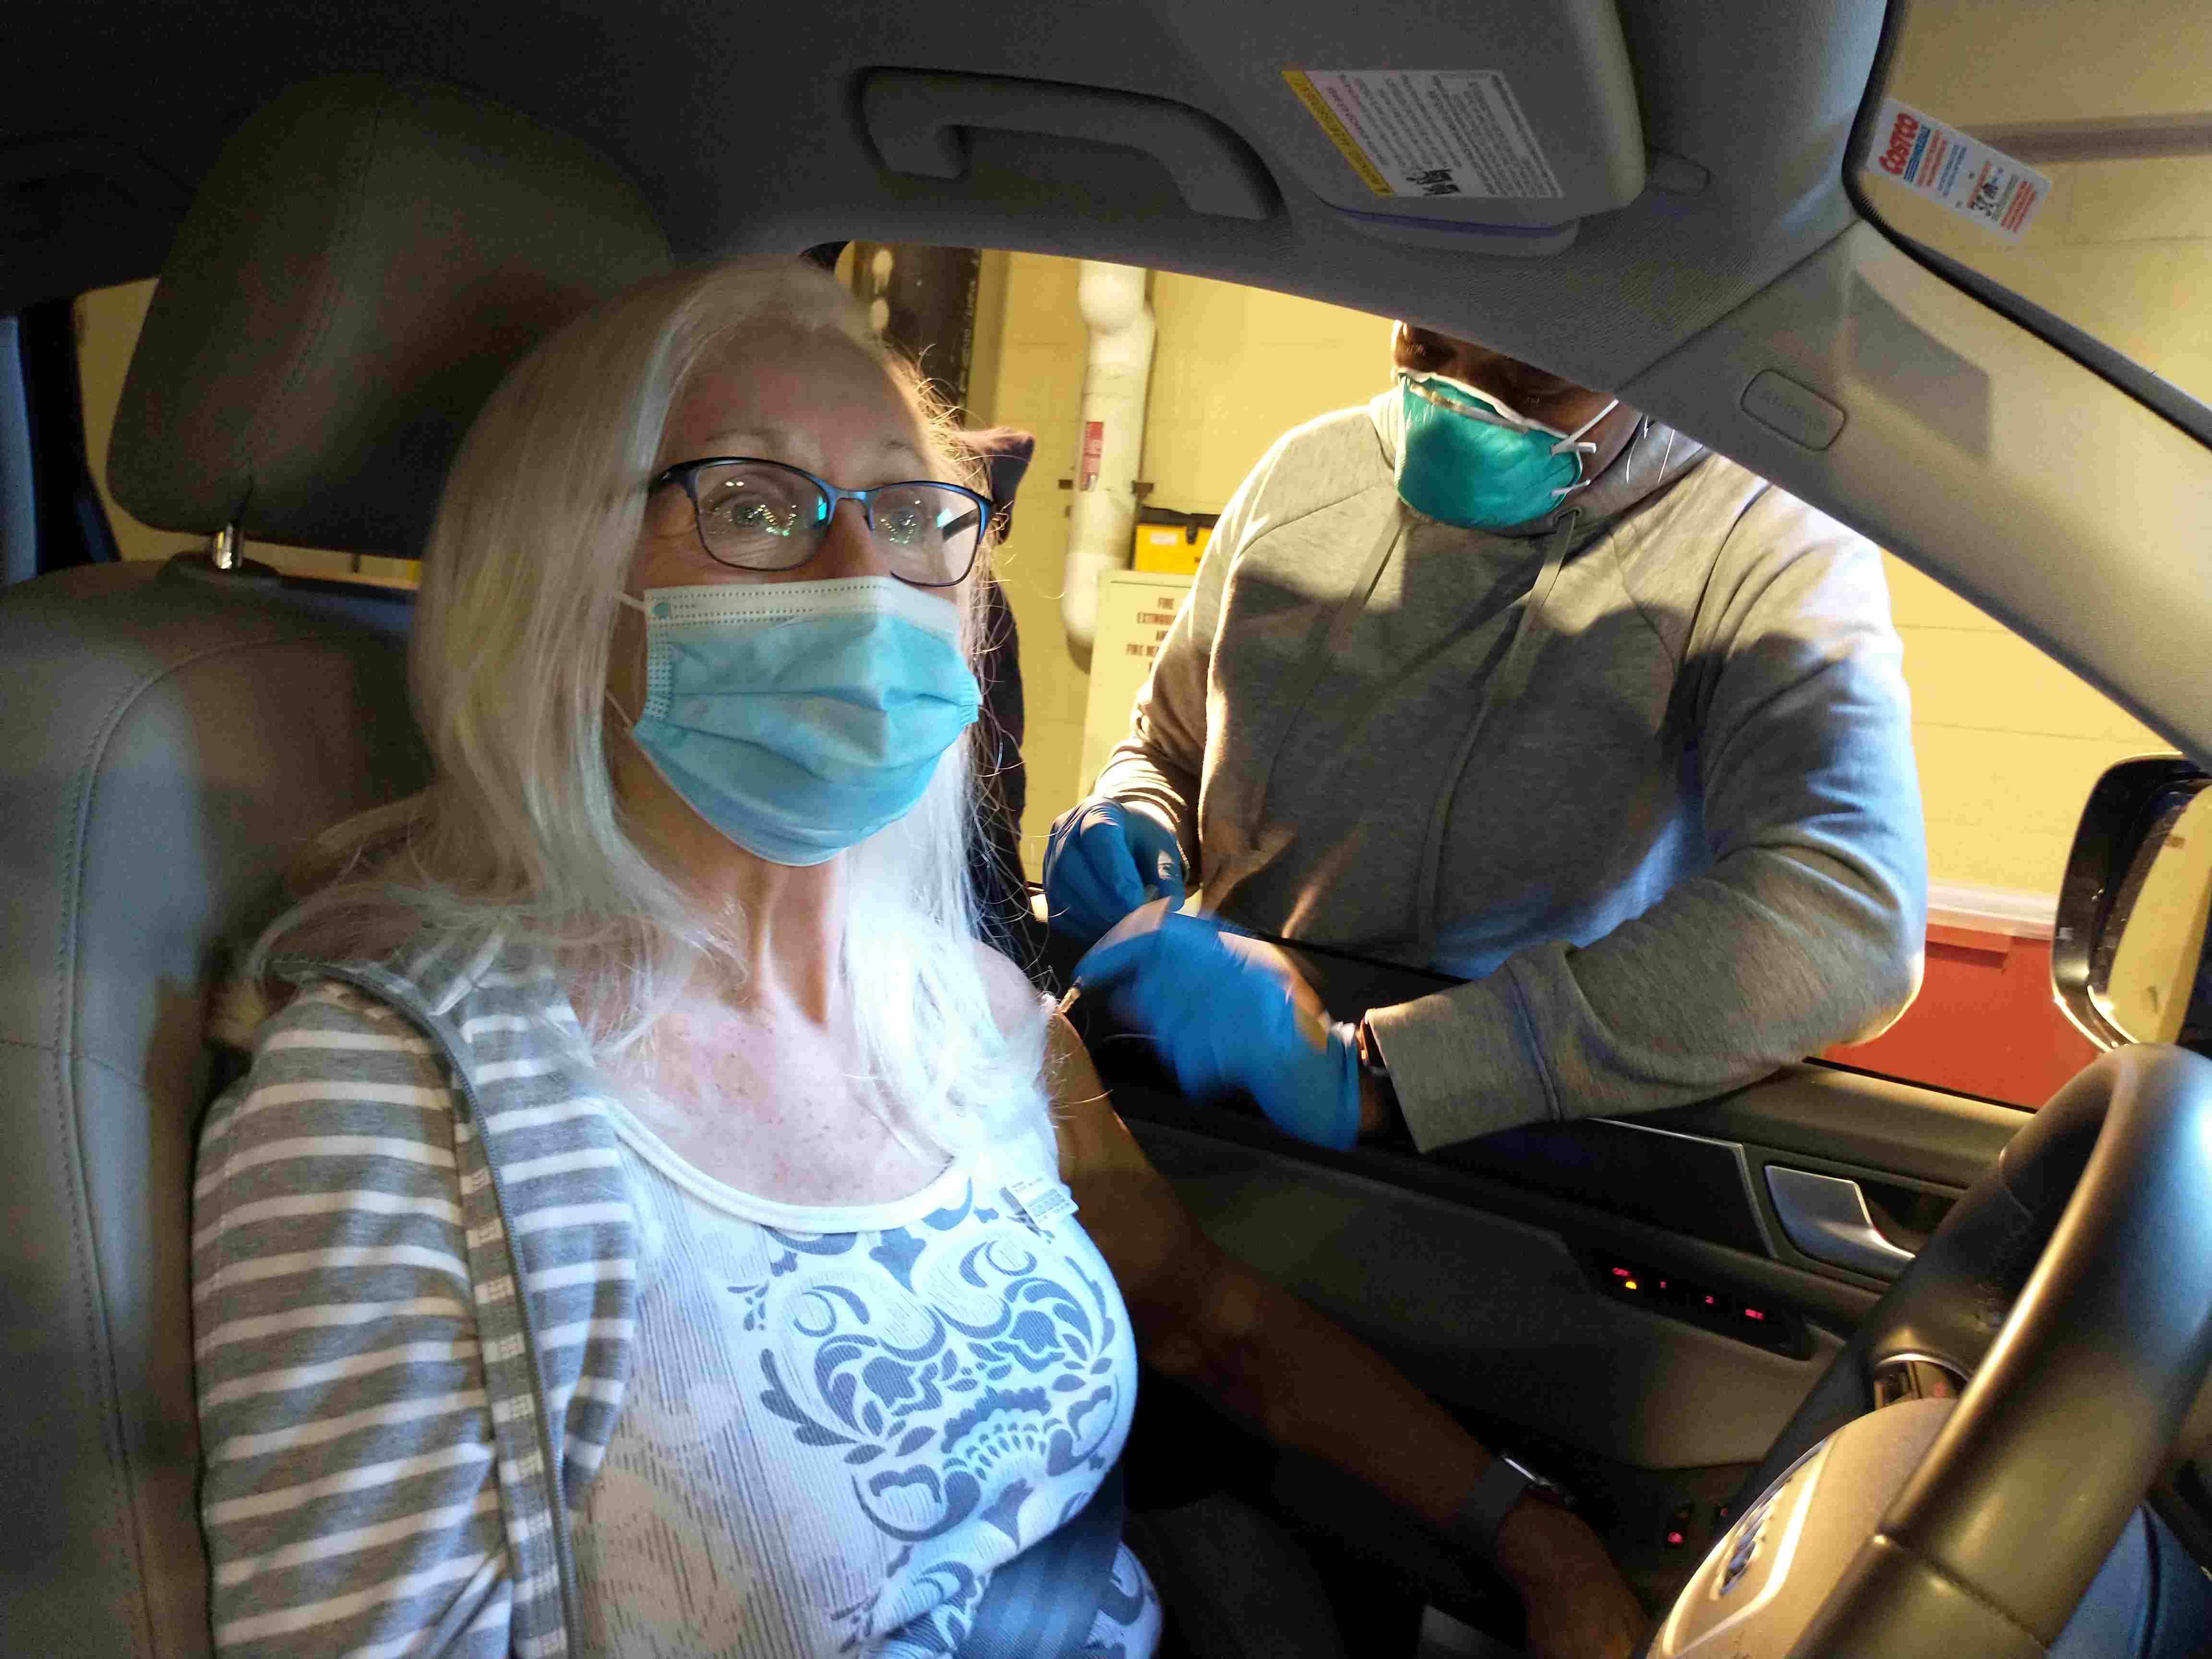 Images Wikimedia Commons/24 Whoisjohngalt COVID-19 Vaccination in Car, Orange County, USA.jpg